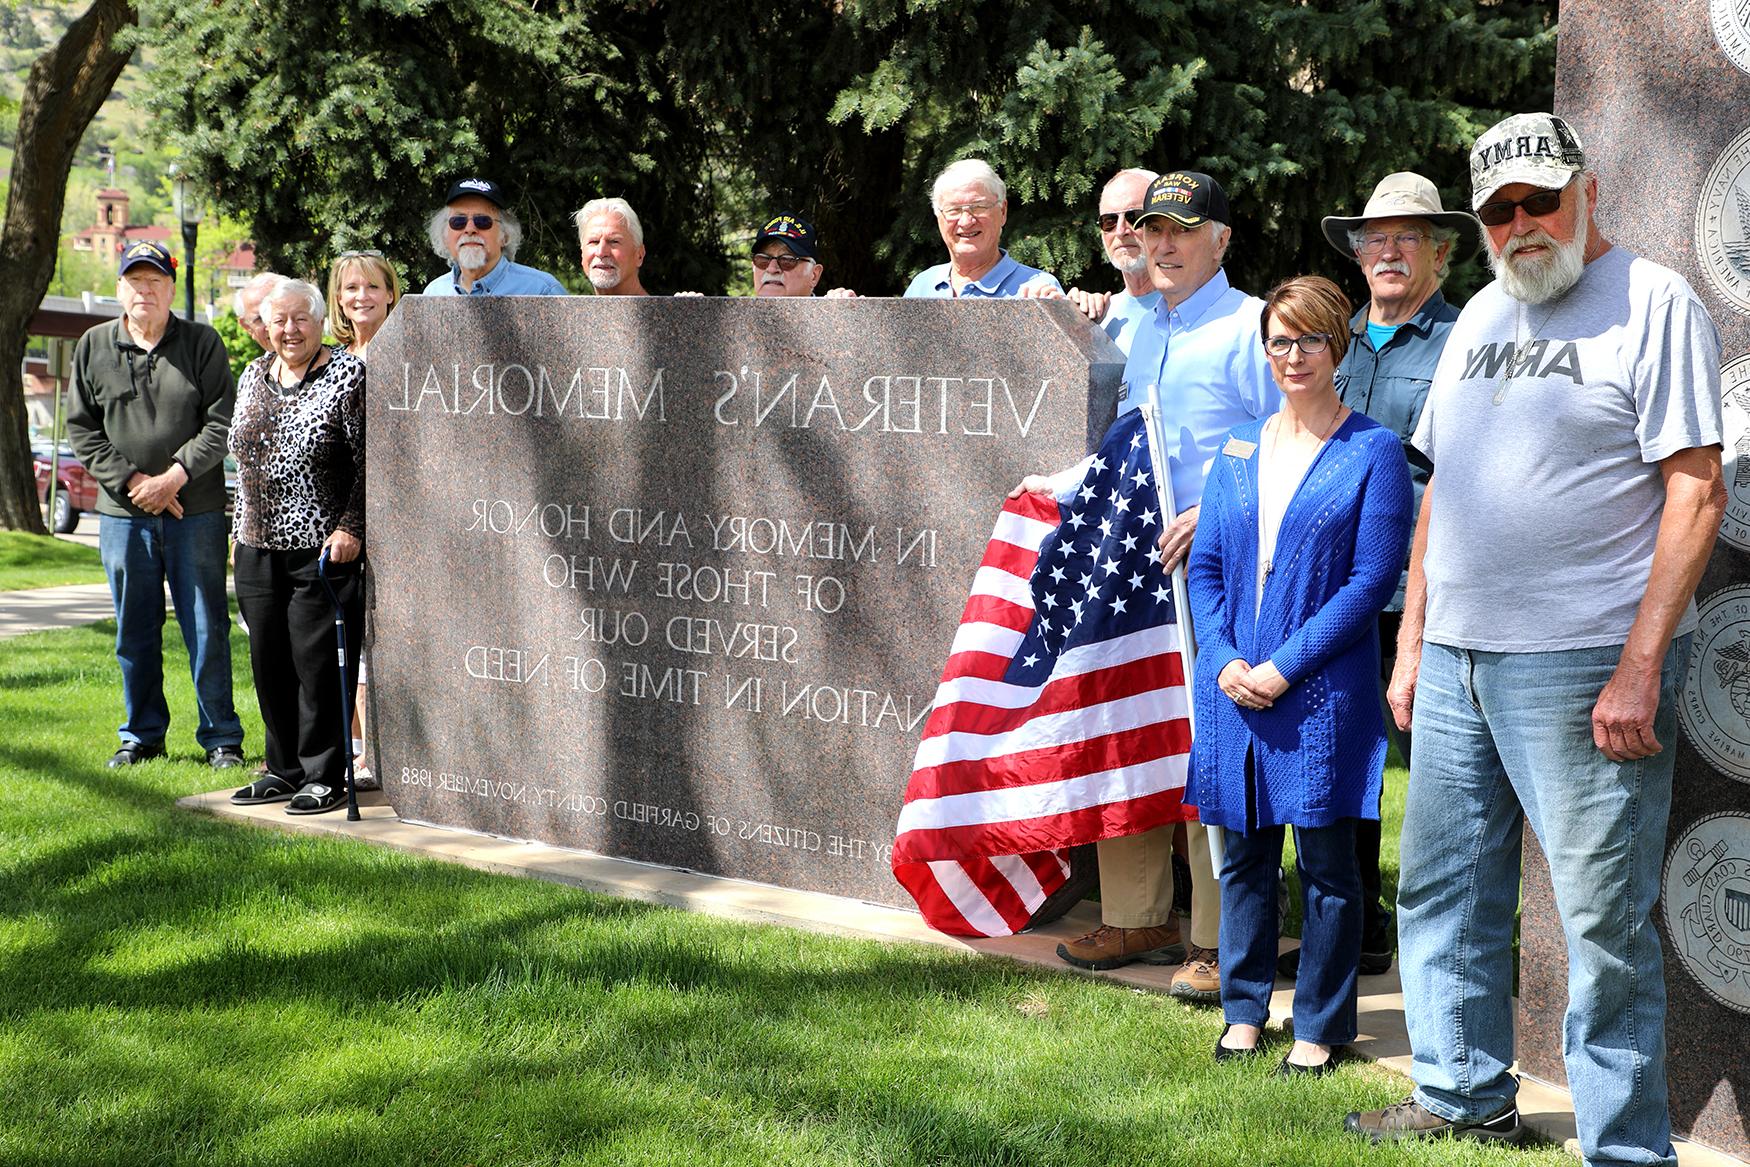 Veterans pose next to the Veteran's Memorial in Glenwood Springs, Colo., on Armed Forces Day 2019.